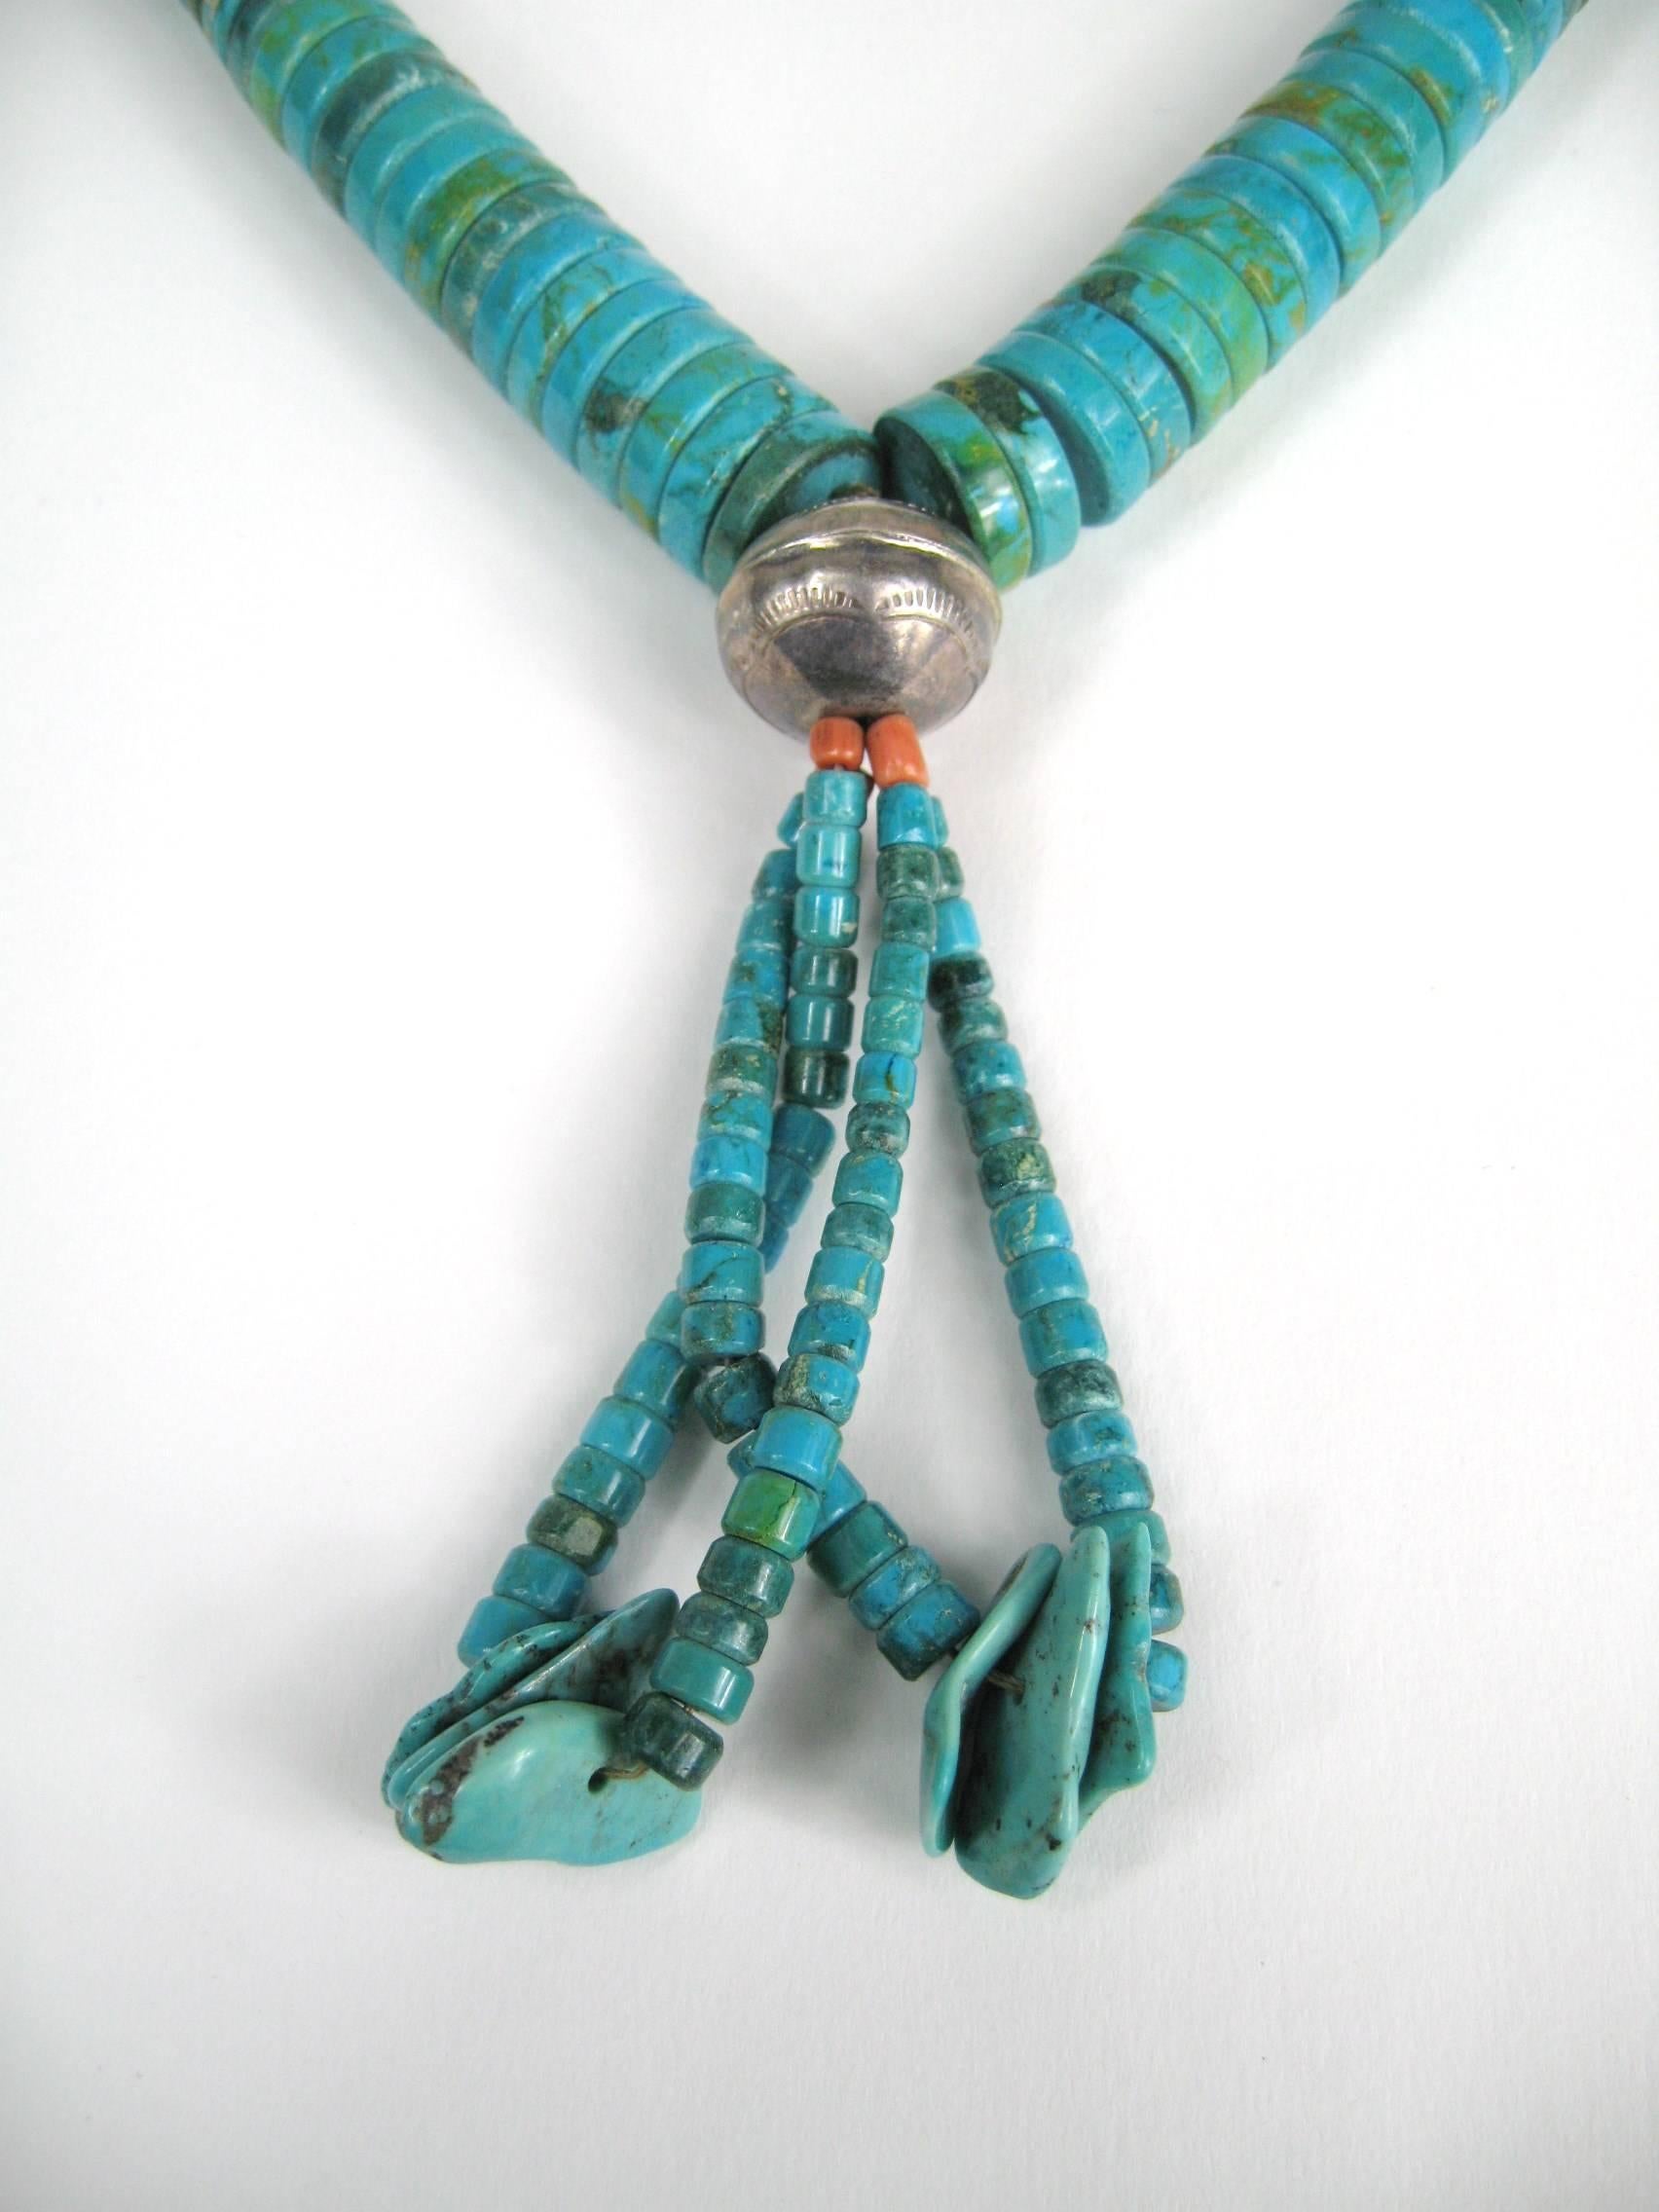 Santo Domingo Pueblo Heishe Turquoise Shell Coral Necklace Jacla Sterling Silver with graduated turquoise heishi necklace with large .73 x .62 inch sterling silver bead and attached jacla. Has sterling silver findings and coral beads at the